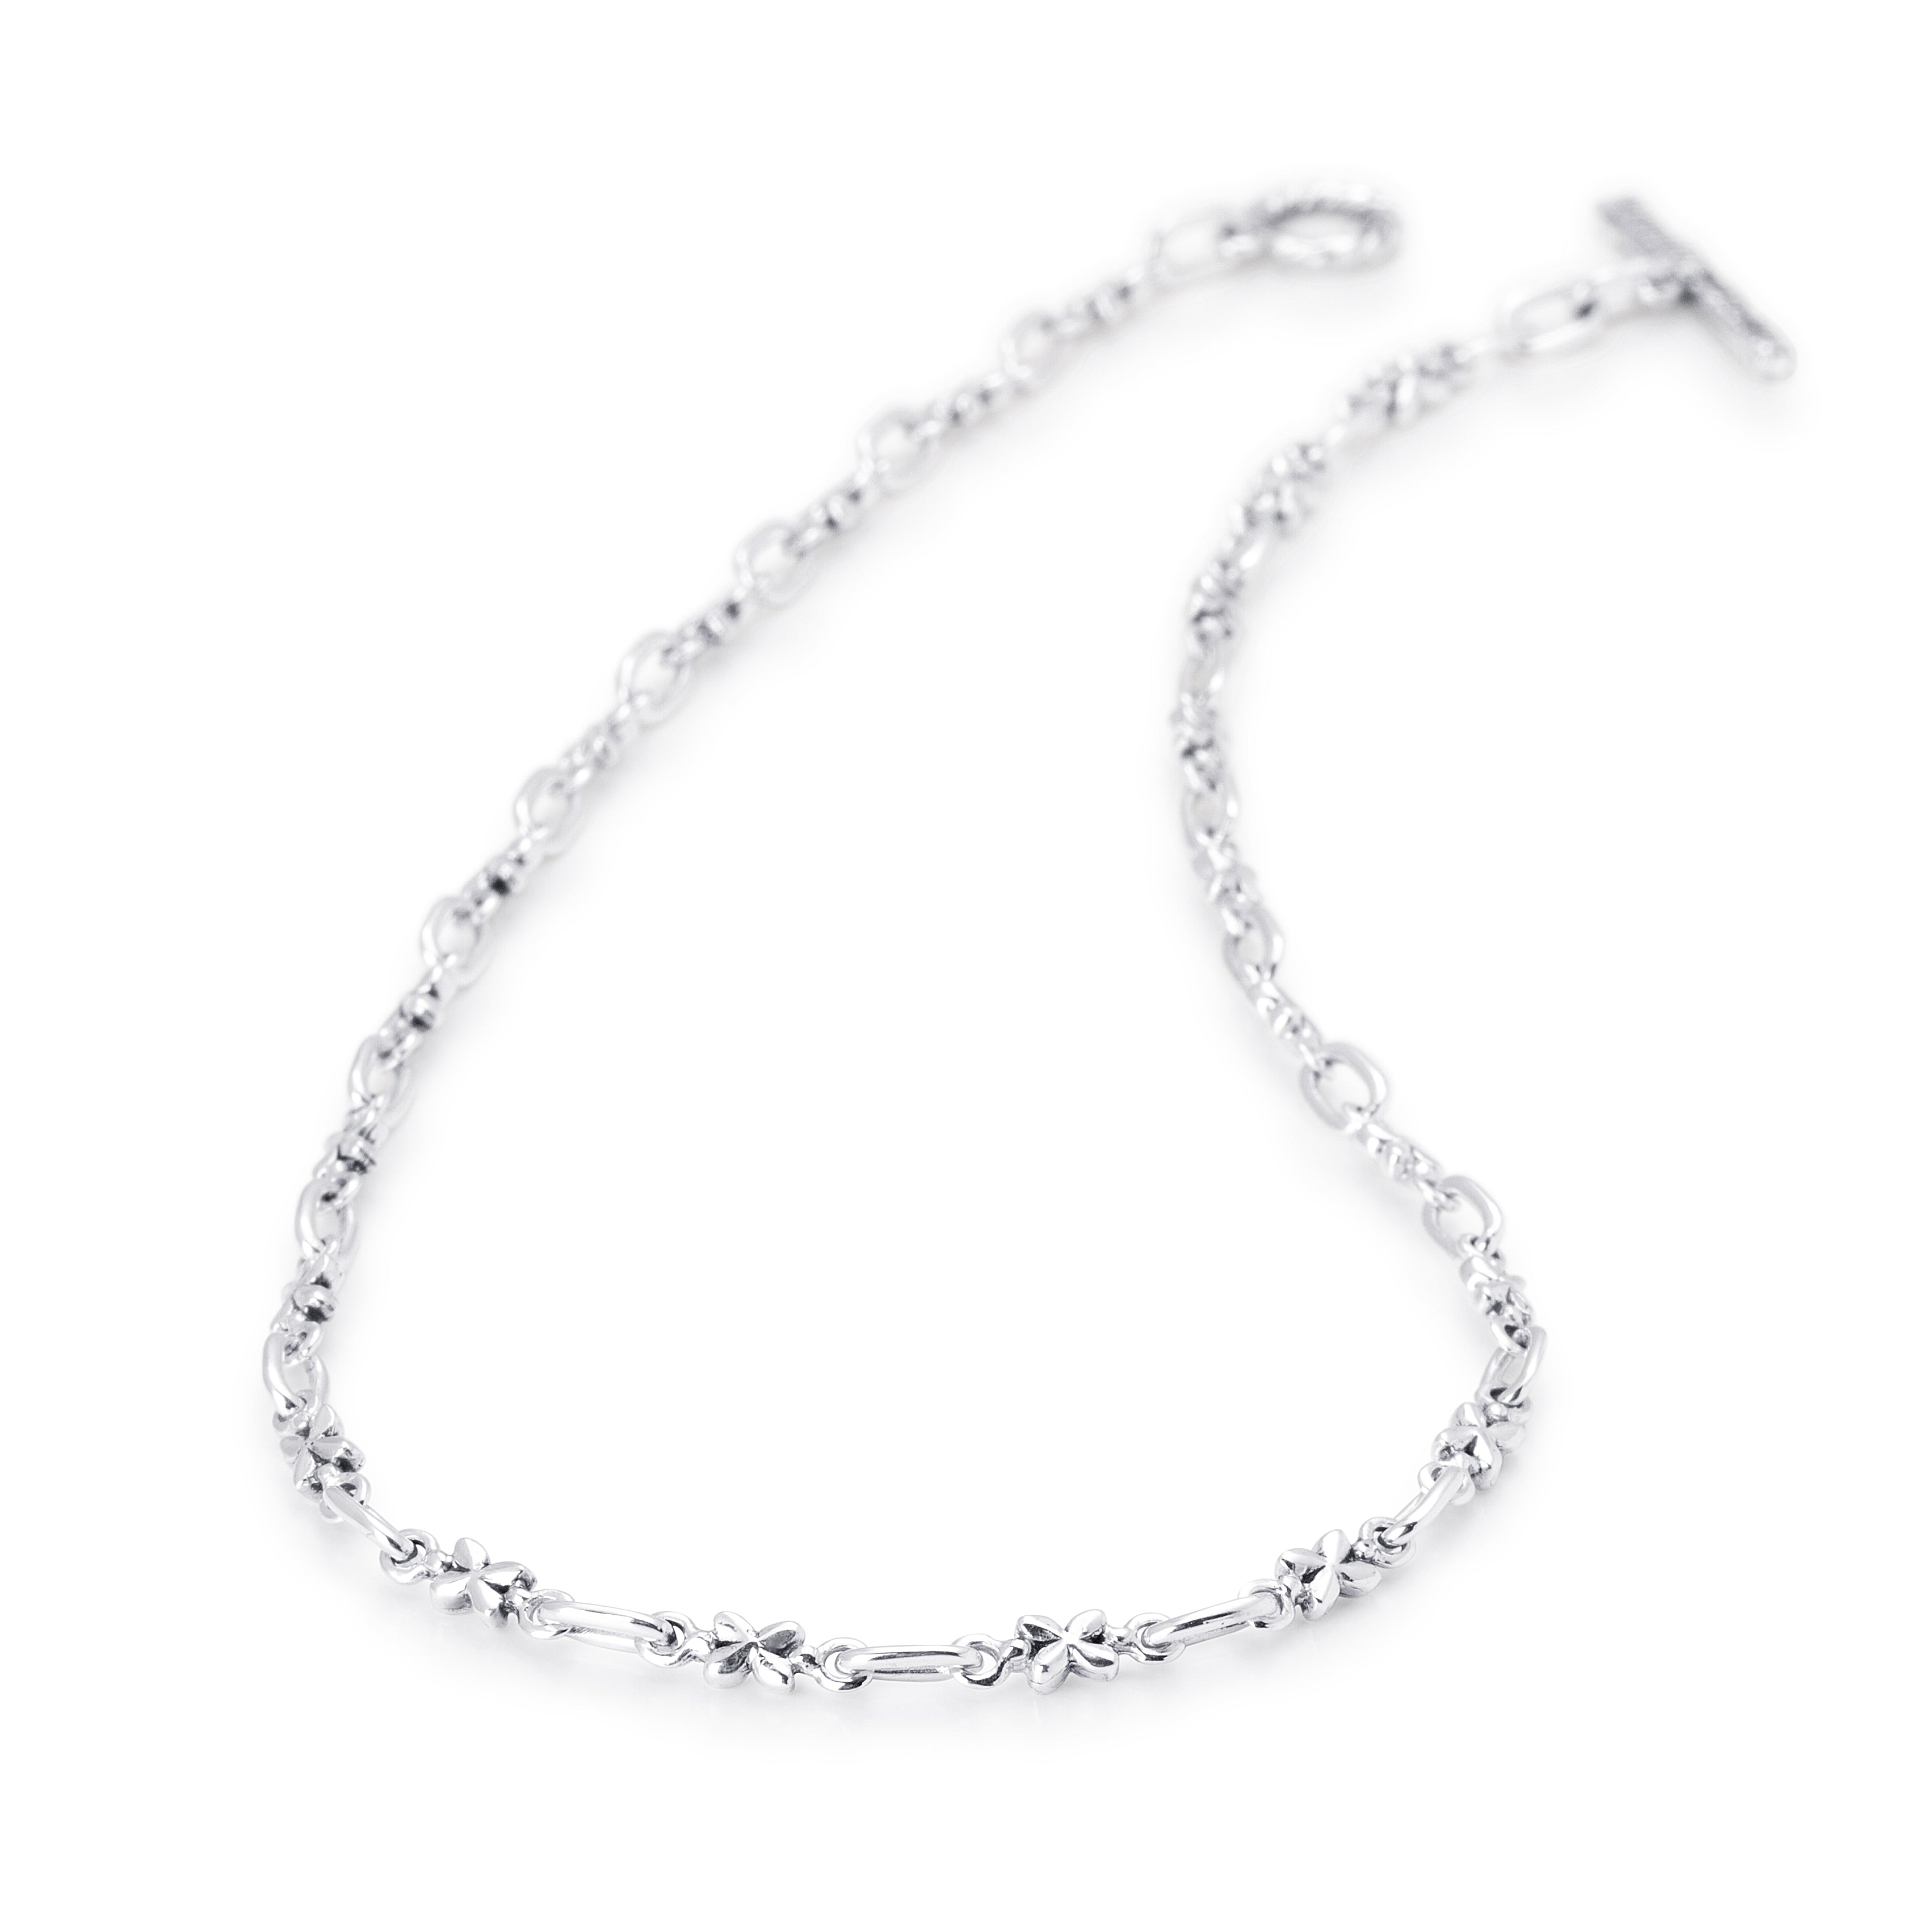 Solid Sterling Silver petite floral patterned links joined with classic open links, T-toggle clasp 